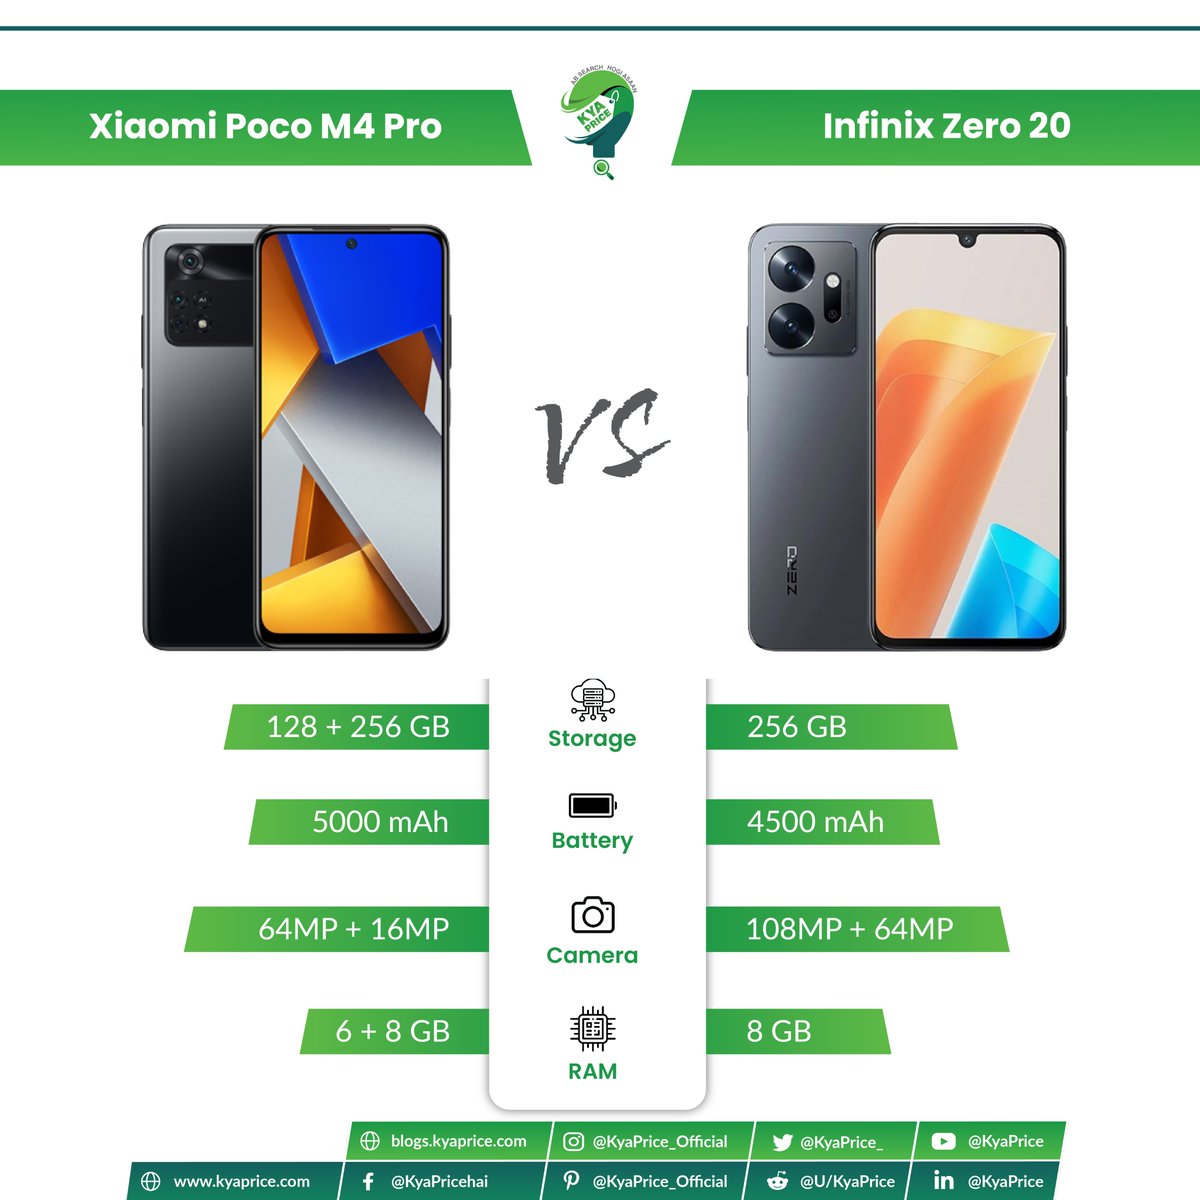 Xiaomi Poco M4 Pro vs Infinix Zero 20
Mobile Comparison You need to see!

For Prices and Features details, visit now: kyaprice.com/ComparisonMobi…

Keep yourself updated by visiting our Channels: bit.ly/m/kyaprice
#Xiaomipocom4pro #mobilecomparison #InfinixZERO20 #kyaprice